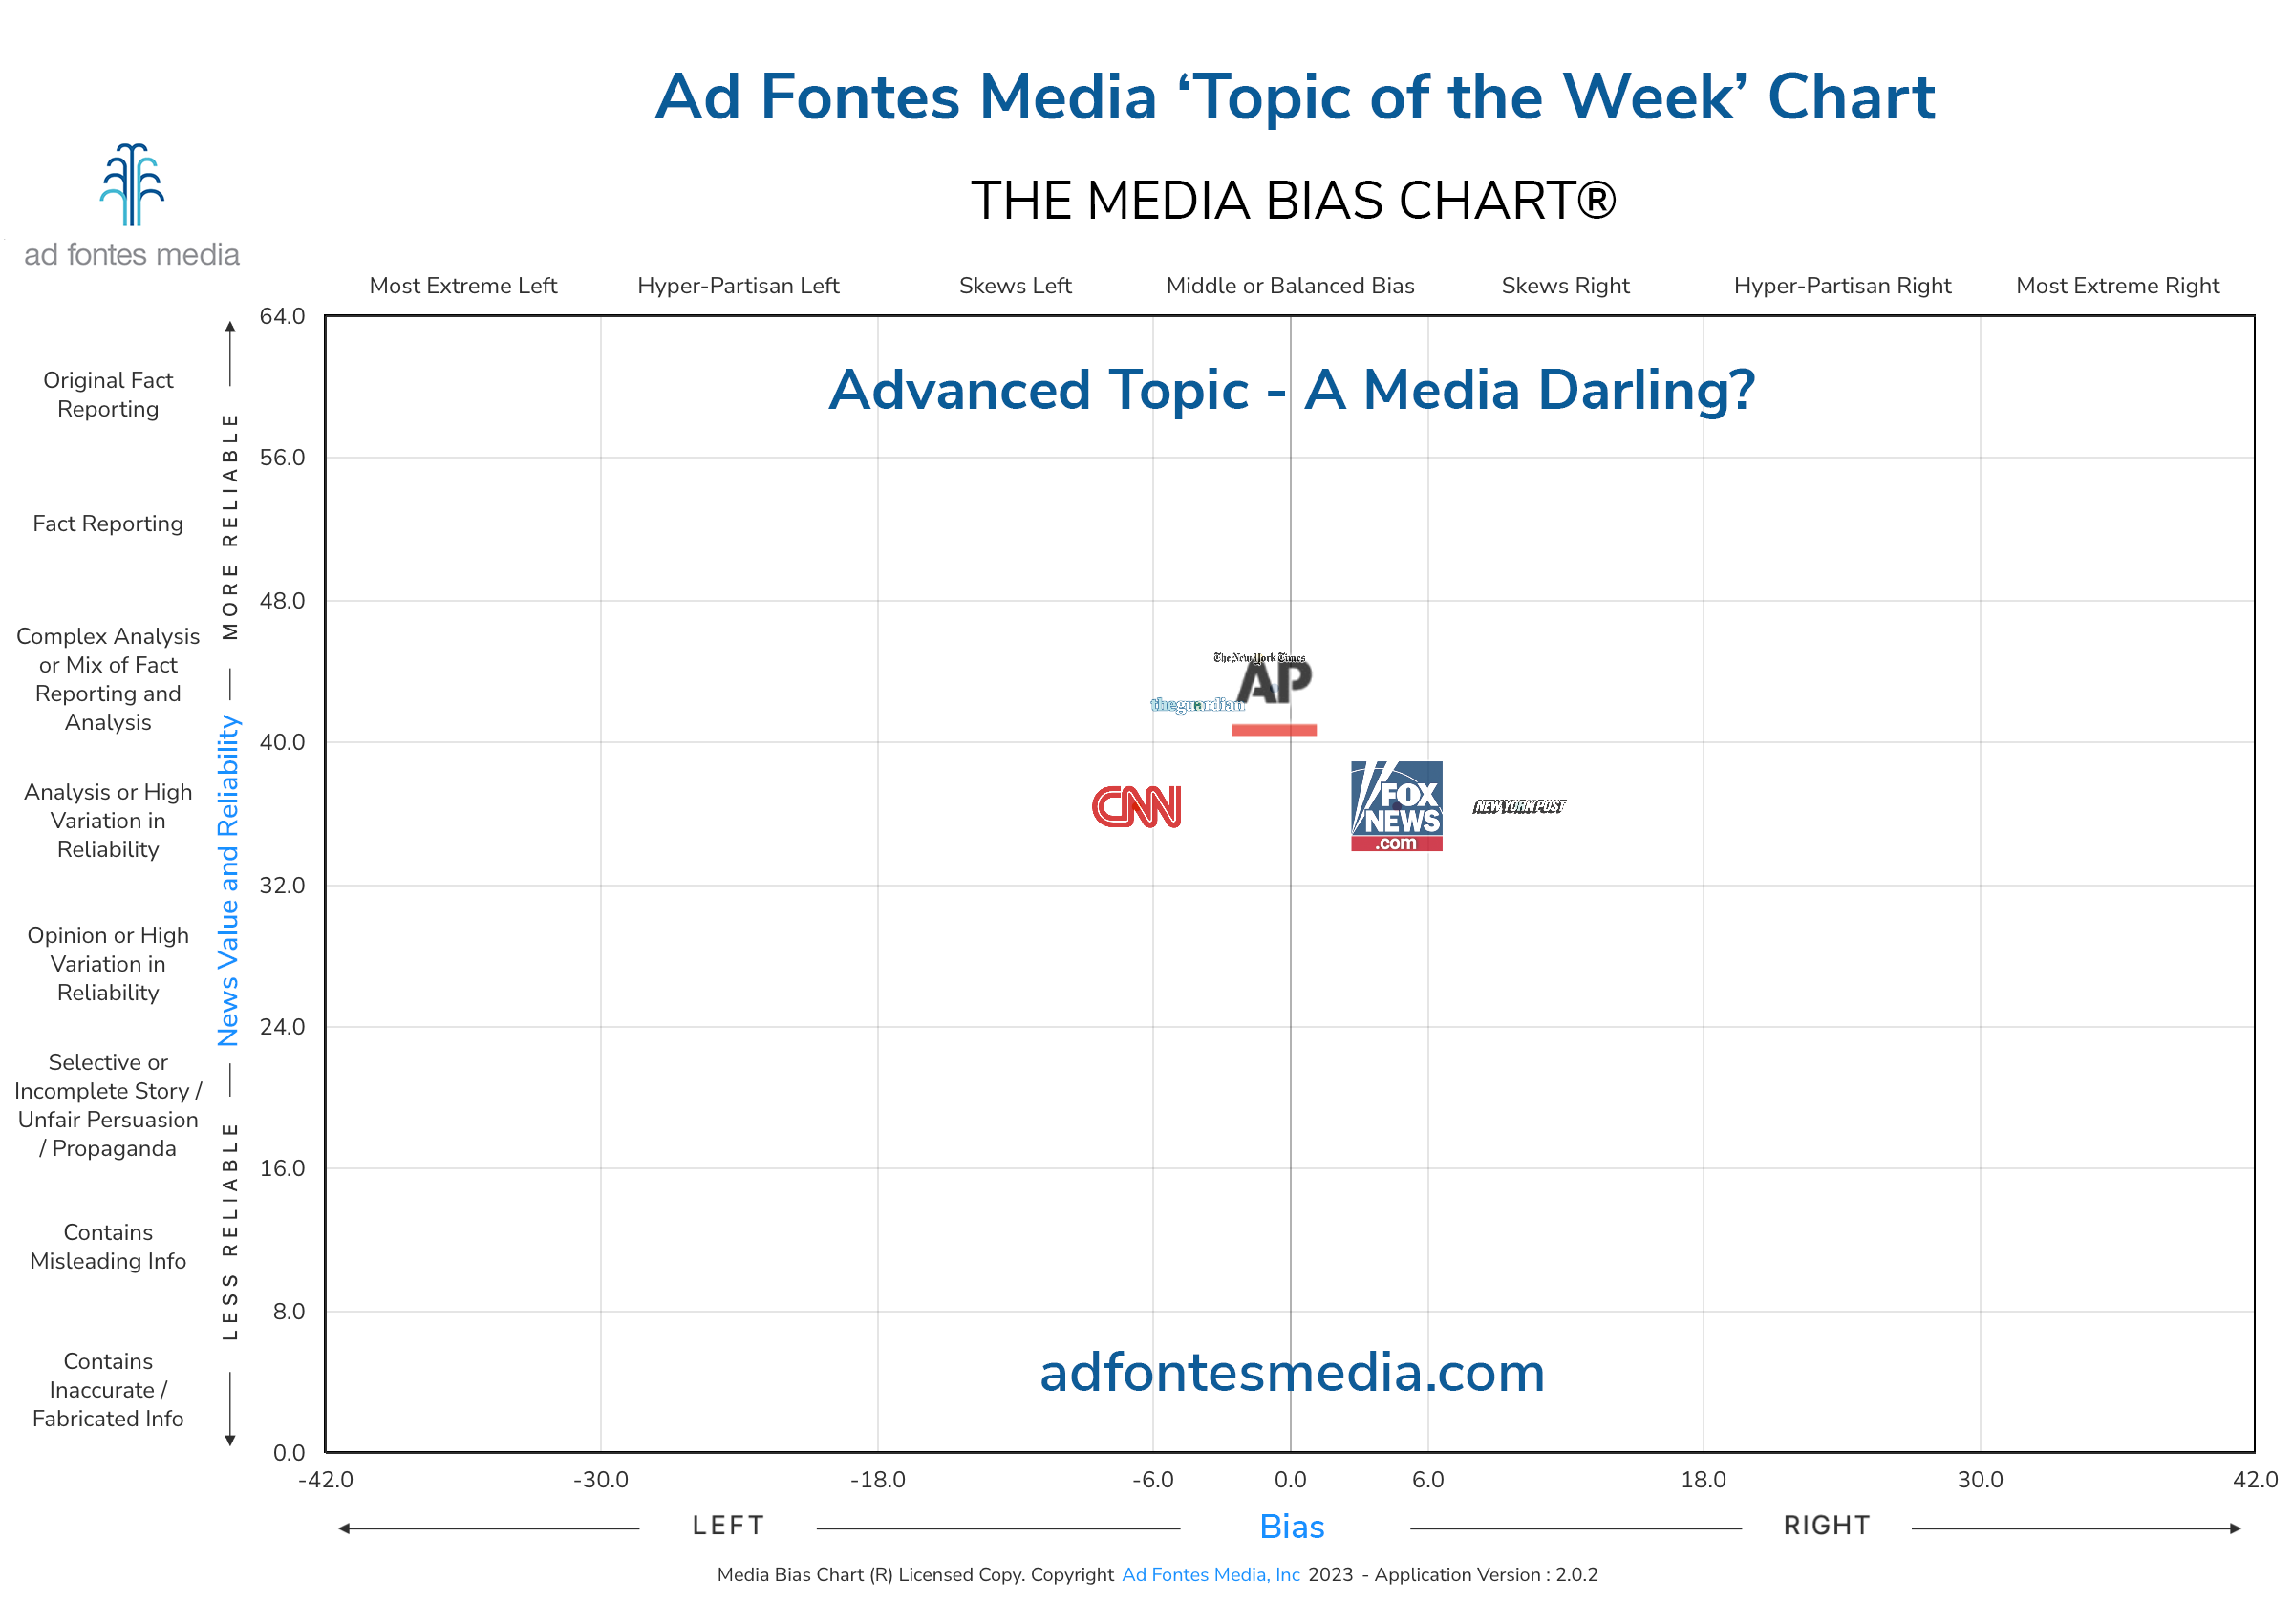 Scores of the A Media Darling? articles on the chart